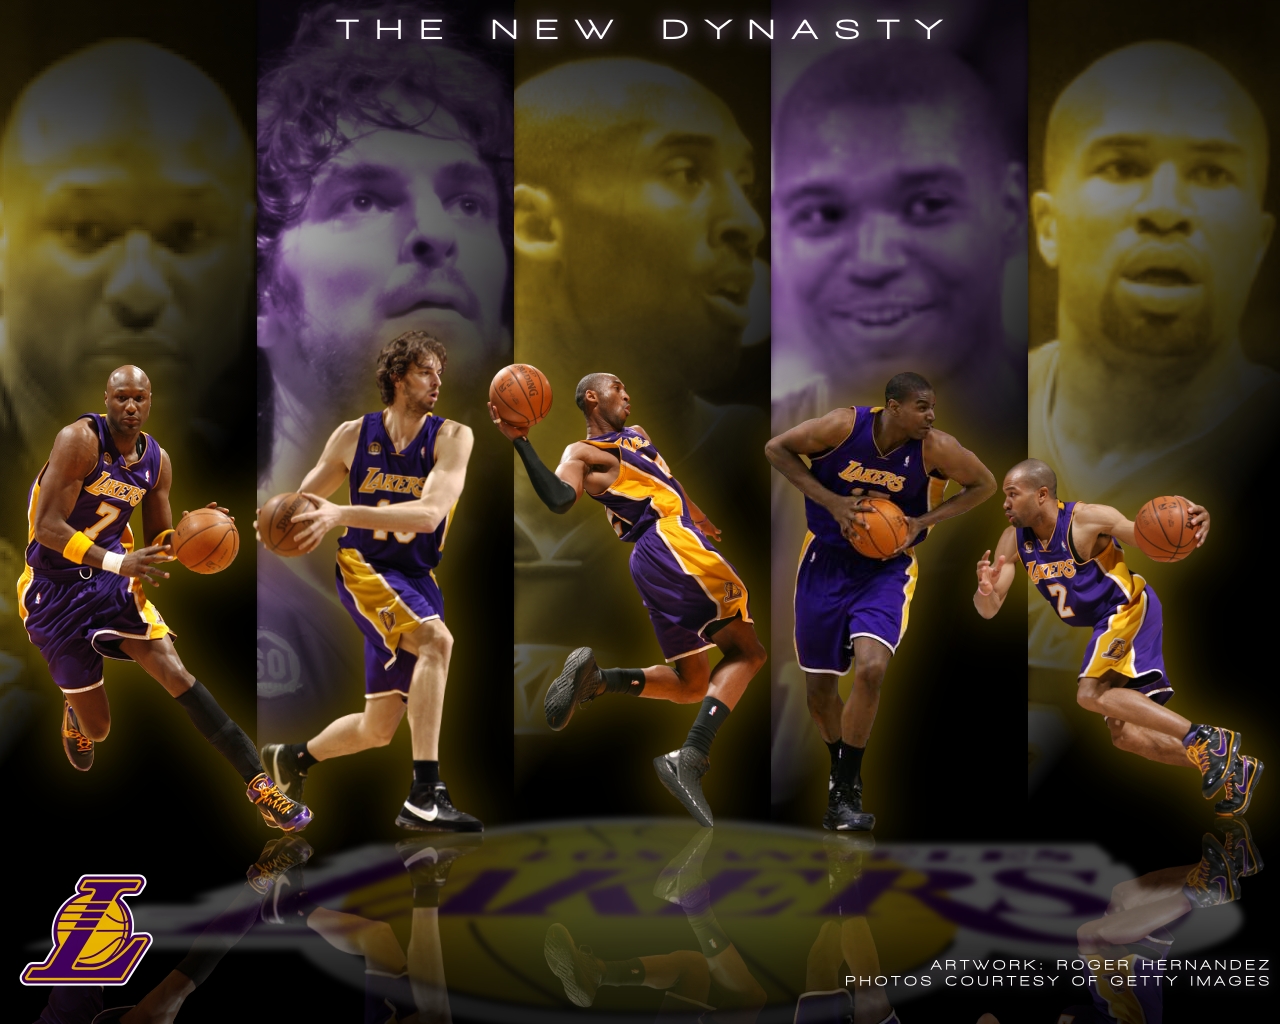 The Los Angeles Lakers Desktop Background collection